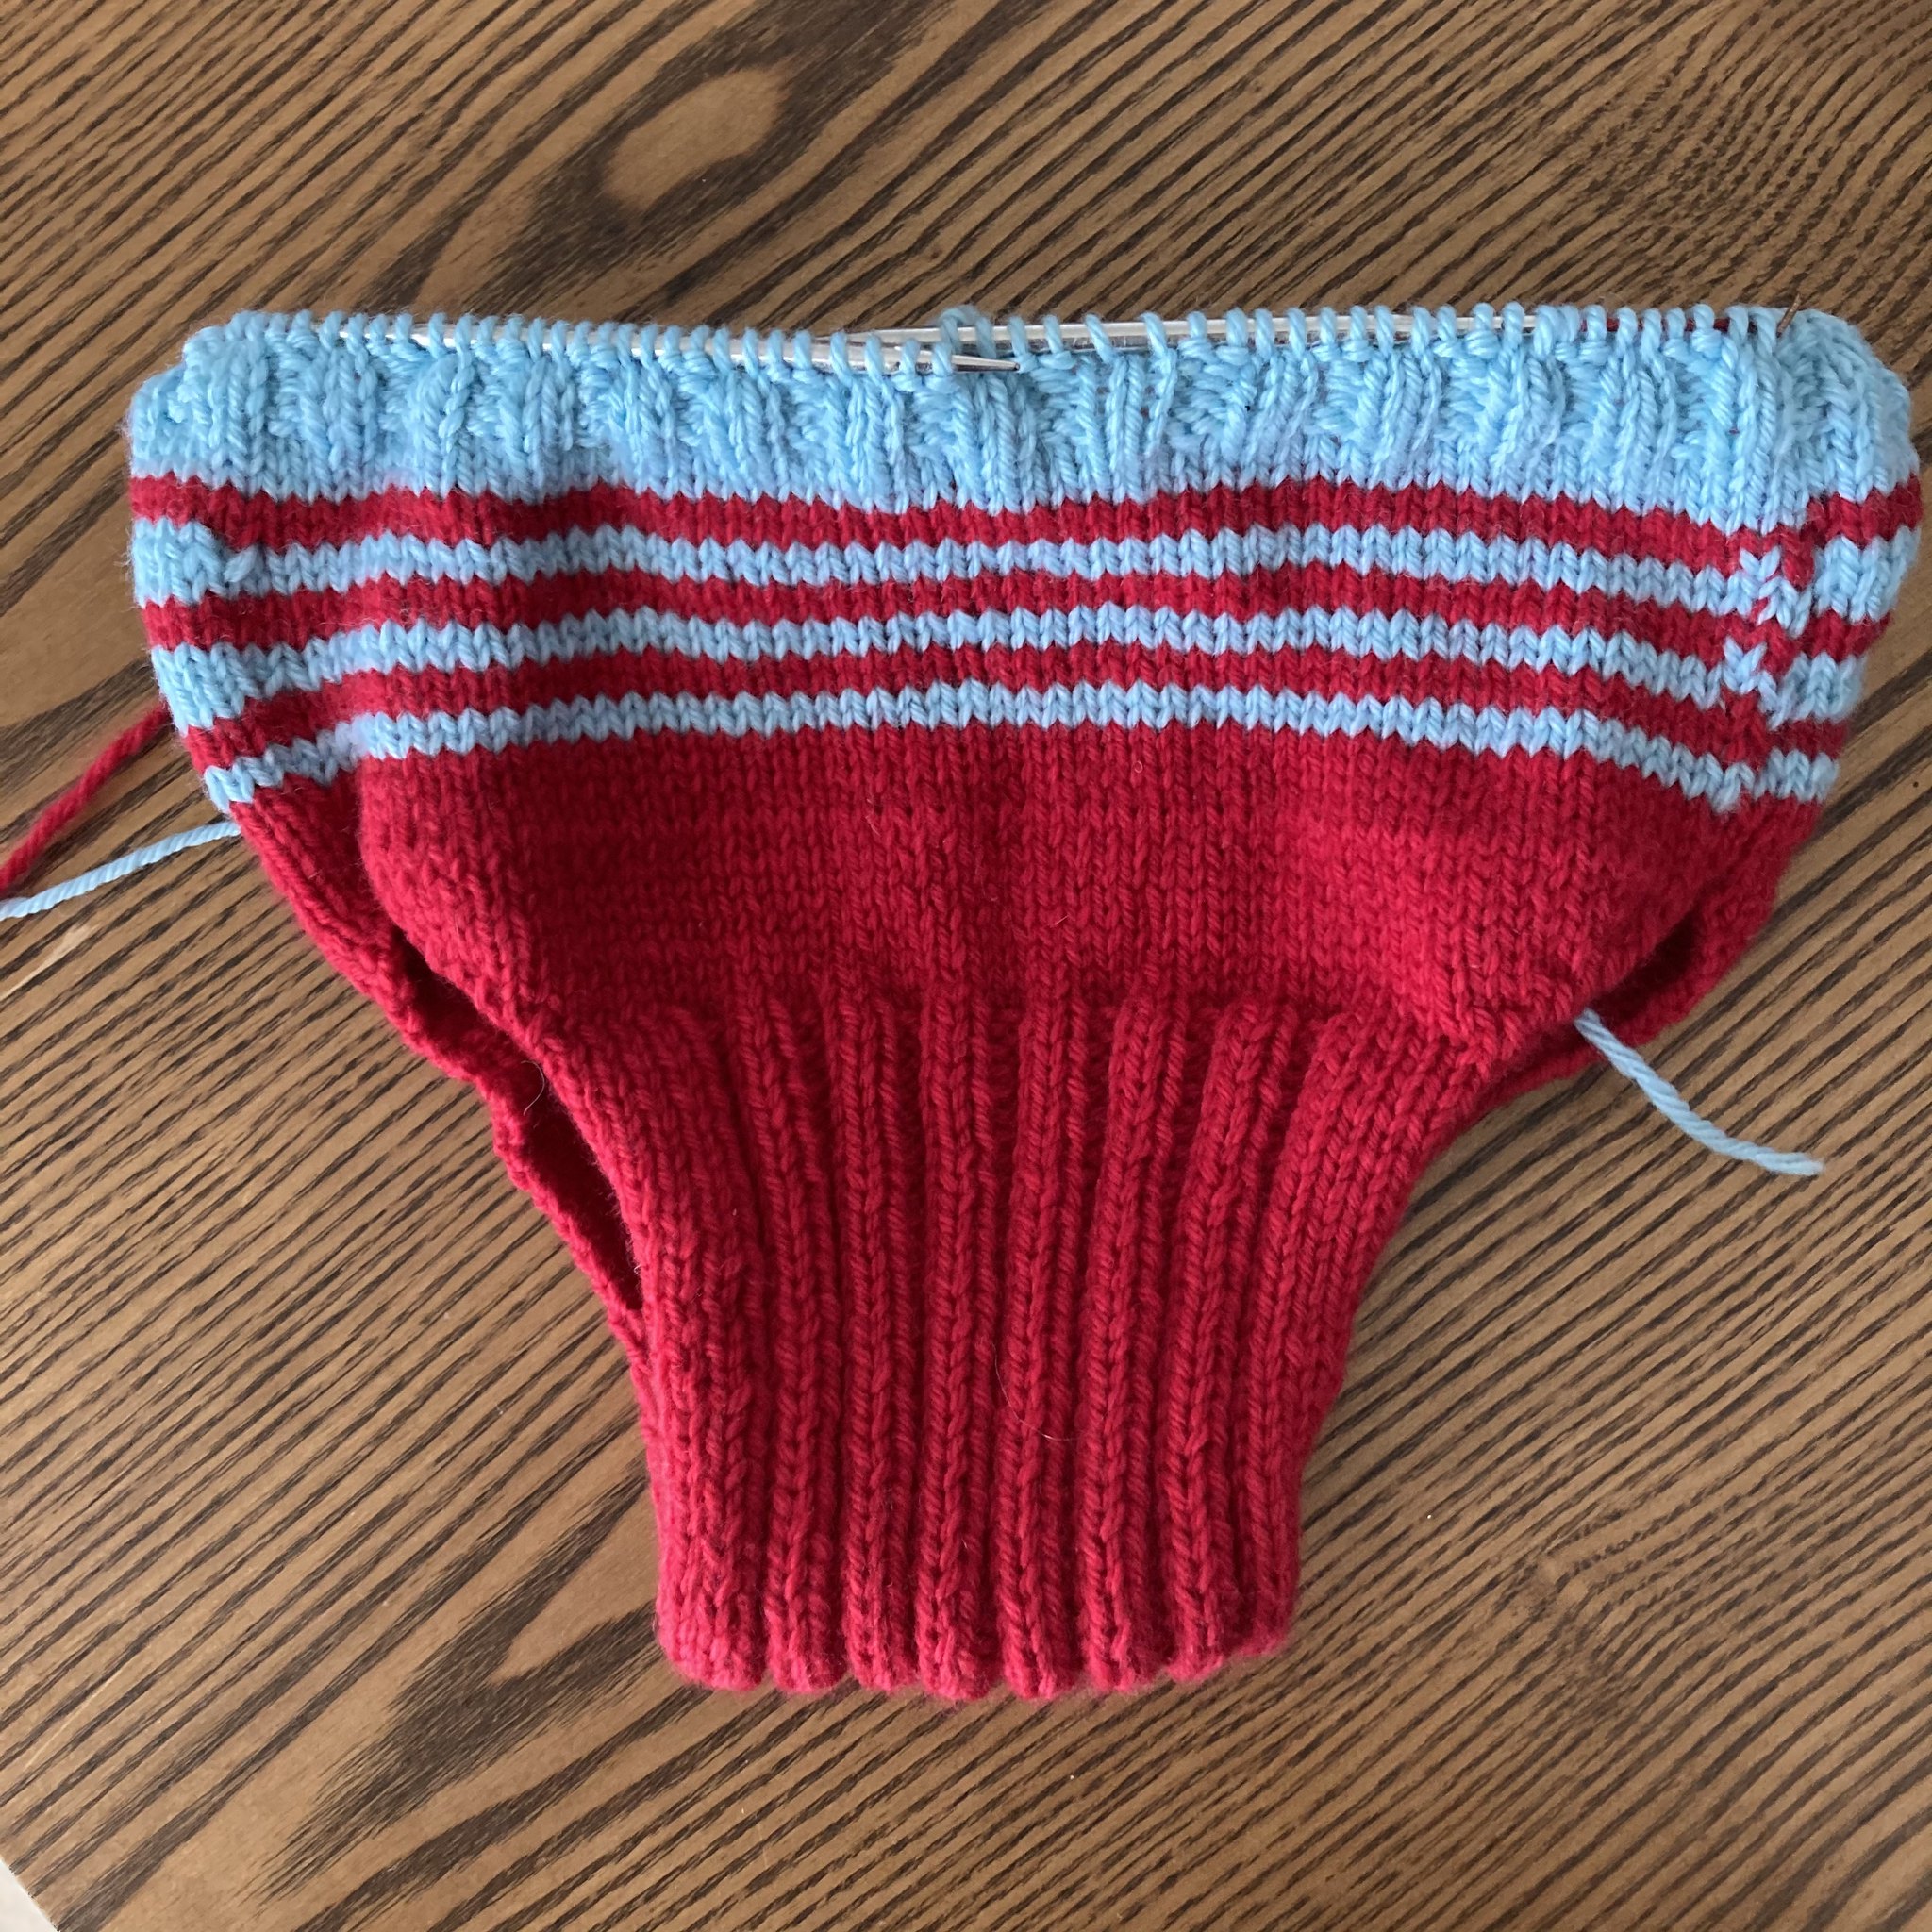 a knitted nappy cover, in progress. it is mainly red, with light blue stripes towards the top. the ribbing at the top has just begun